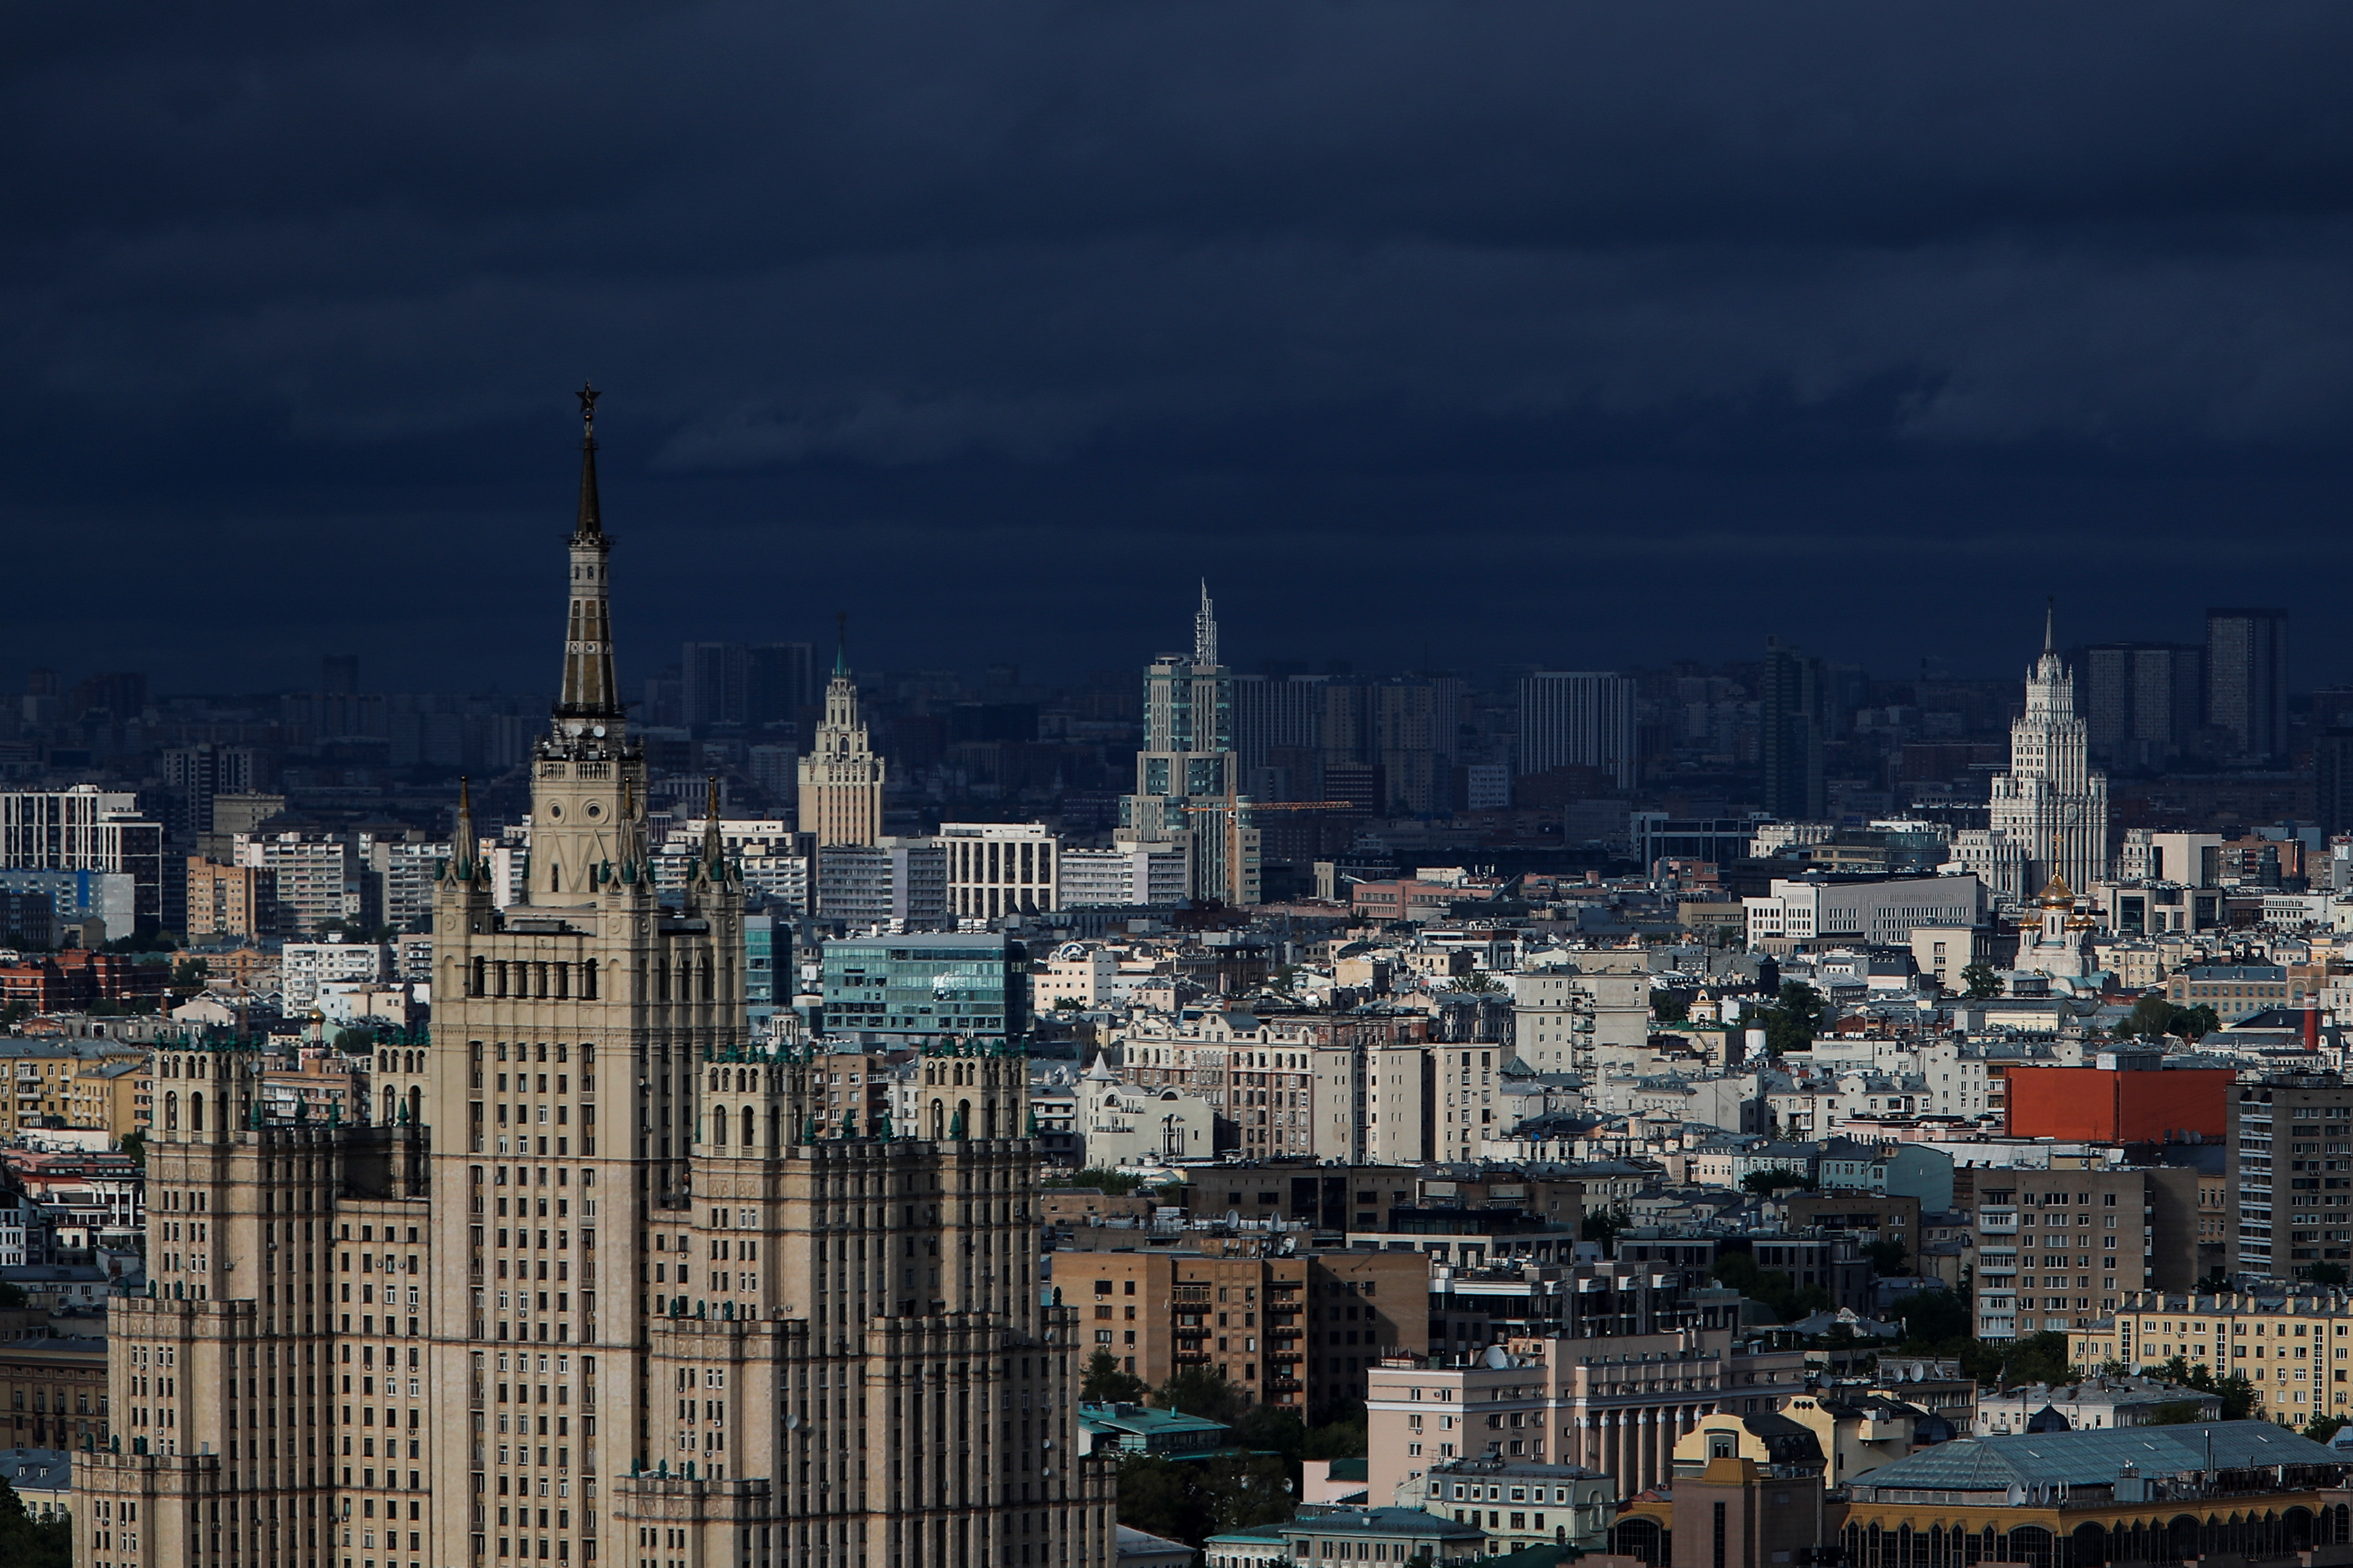 A general view shows the city centre and Stalin-era skyscrapers in Moscow